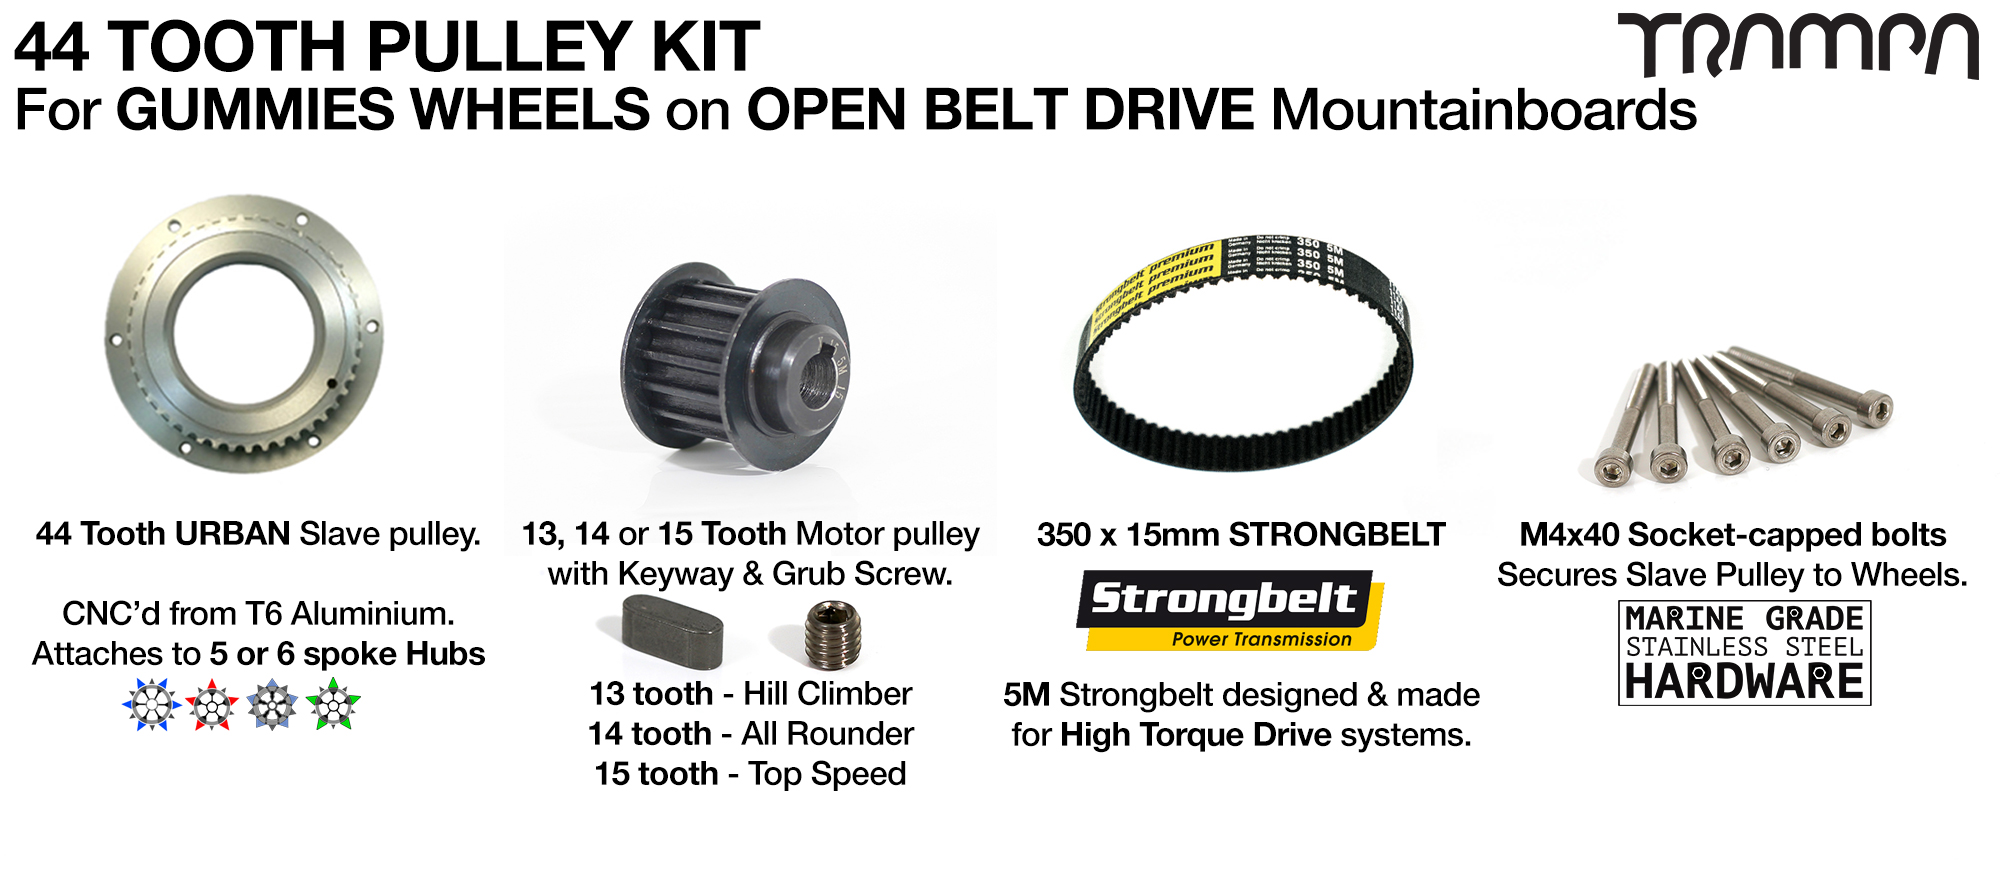 66T OBD Panel with 44 Tooth Pulley Kit & 330mm x 15mm Belt for GUMMIES Wheels